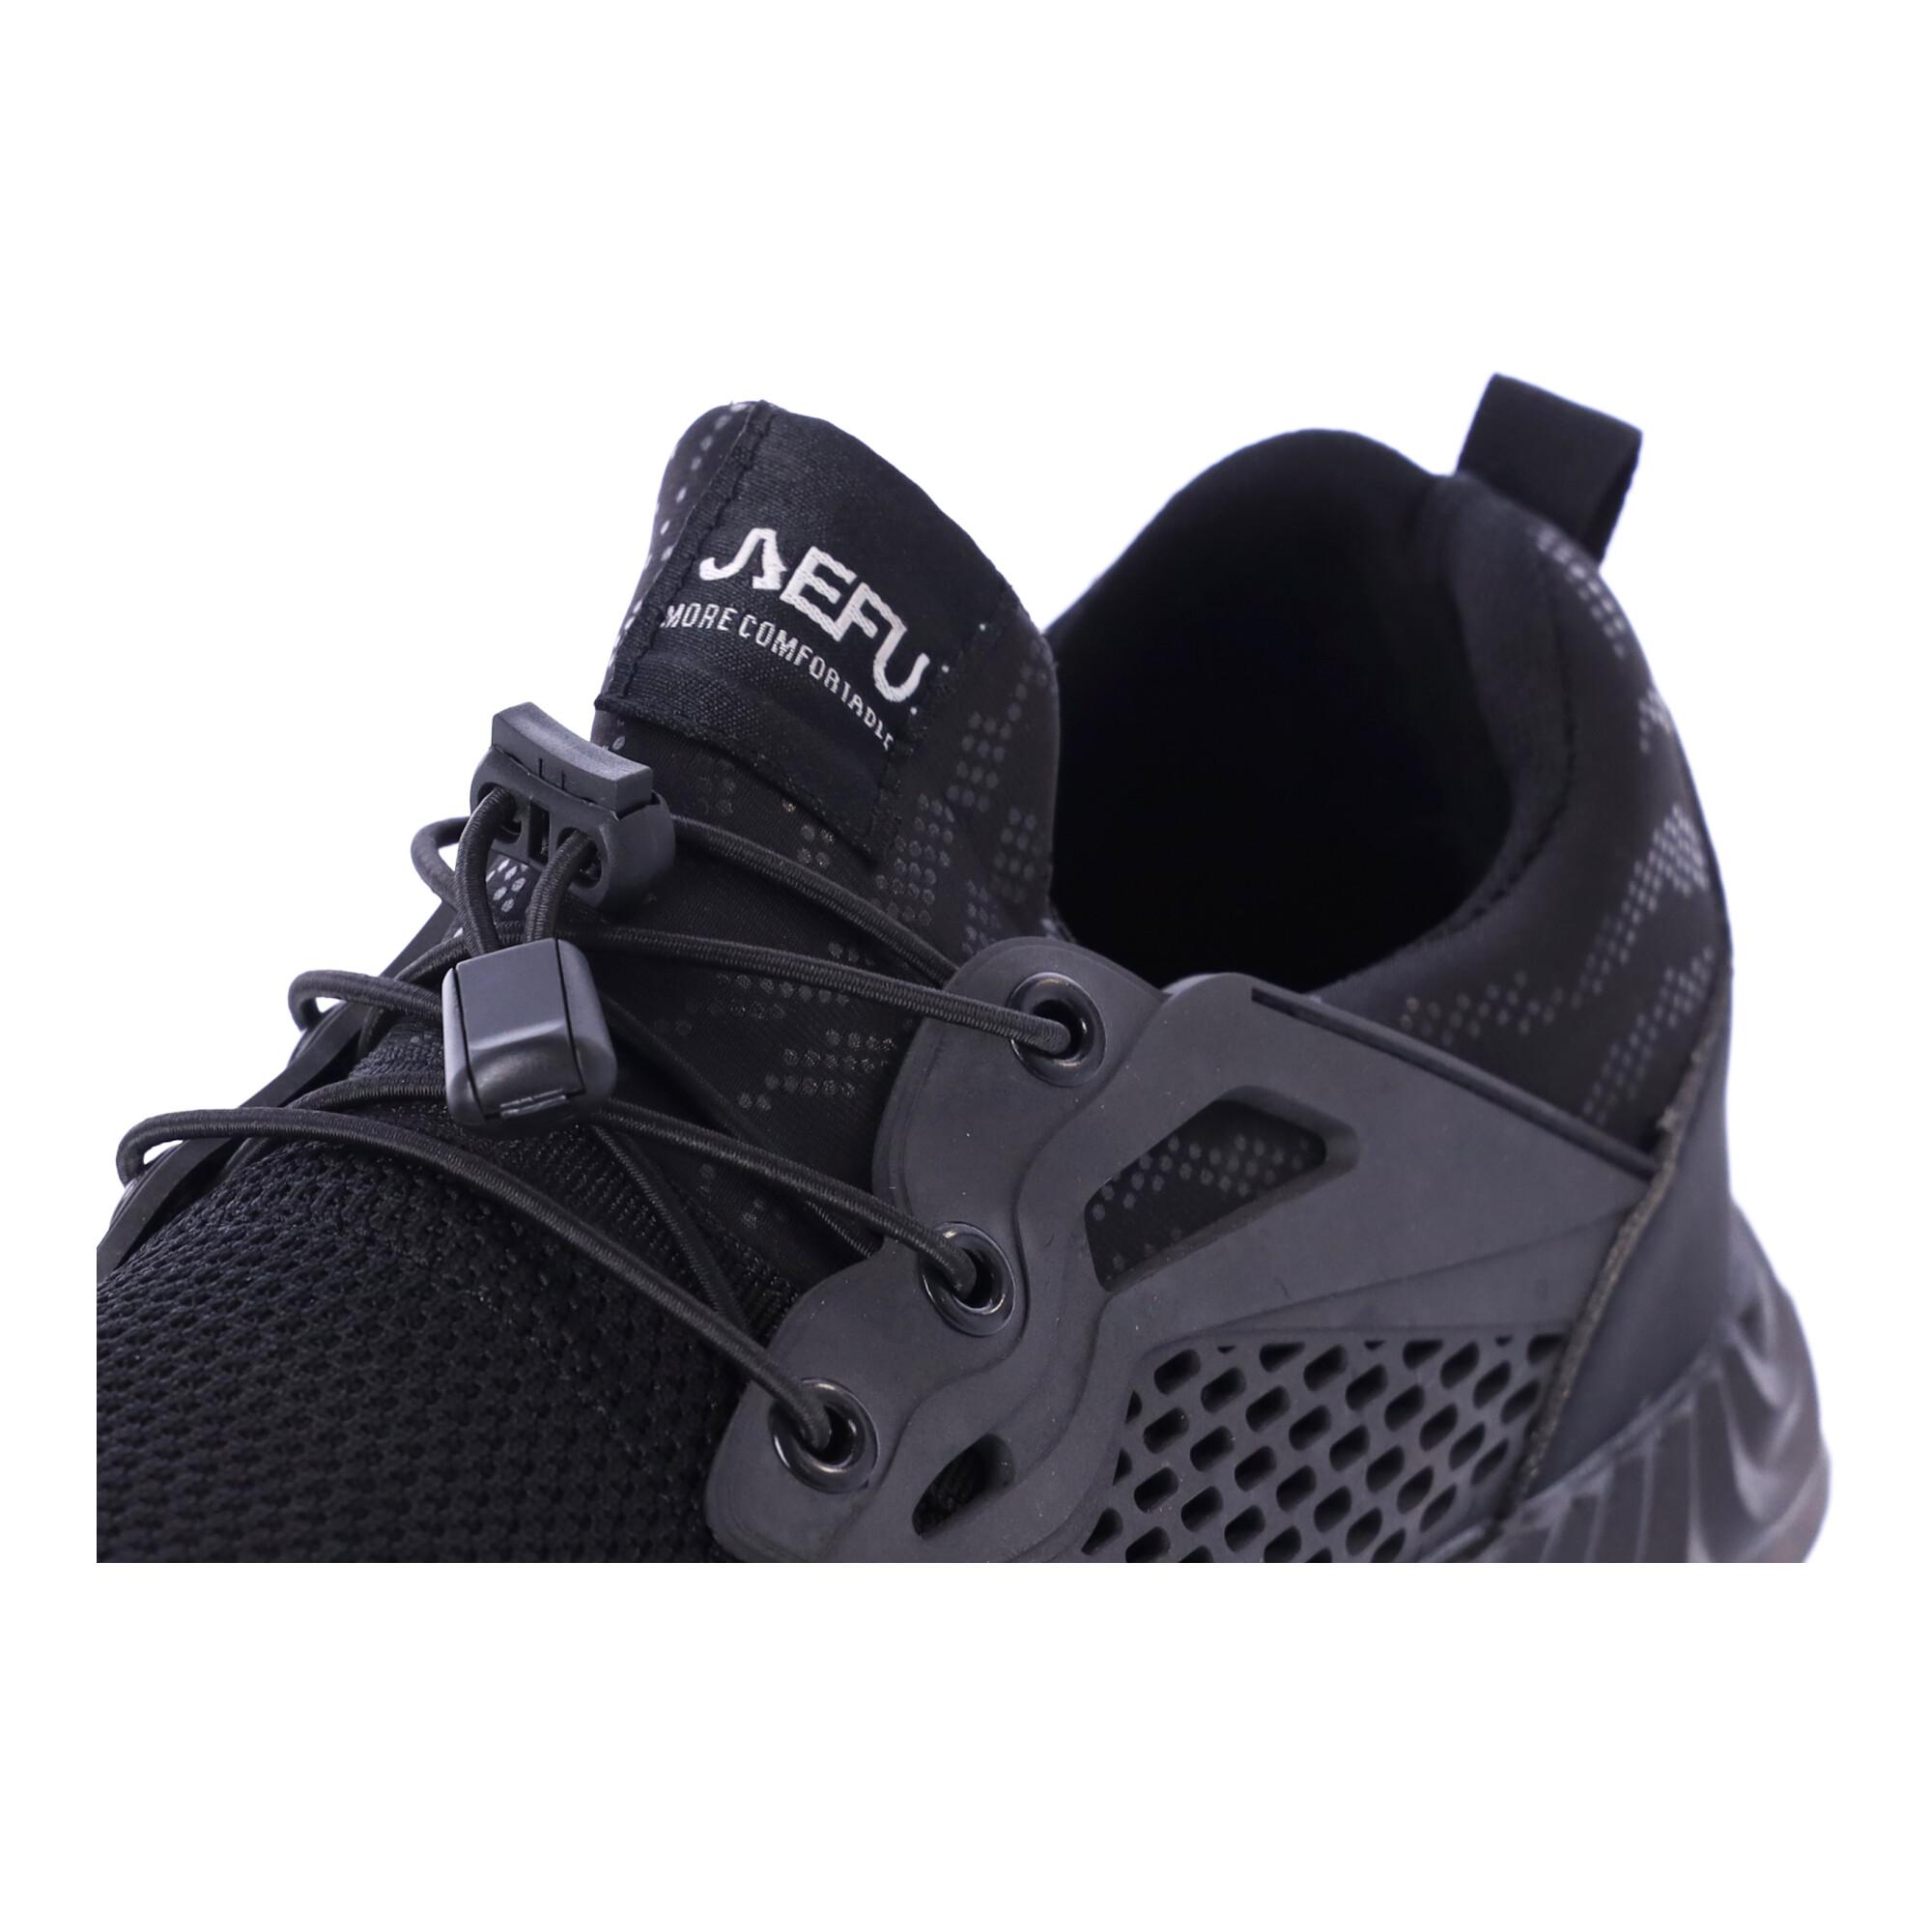 Work safety shoes "42" - black